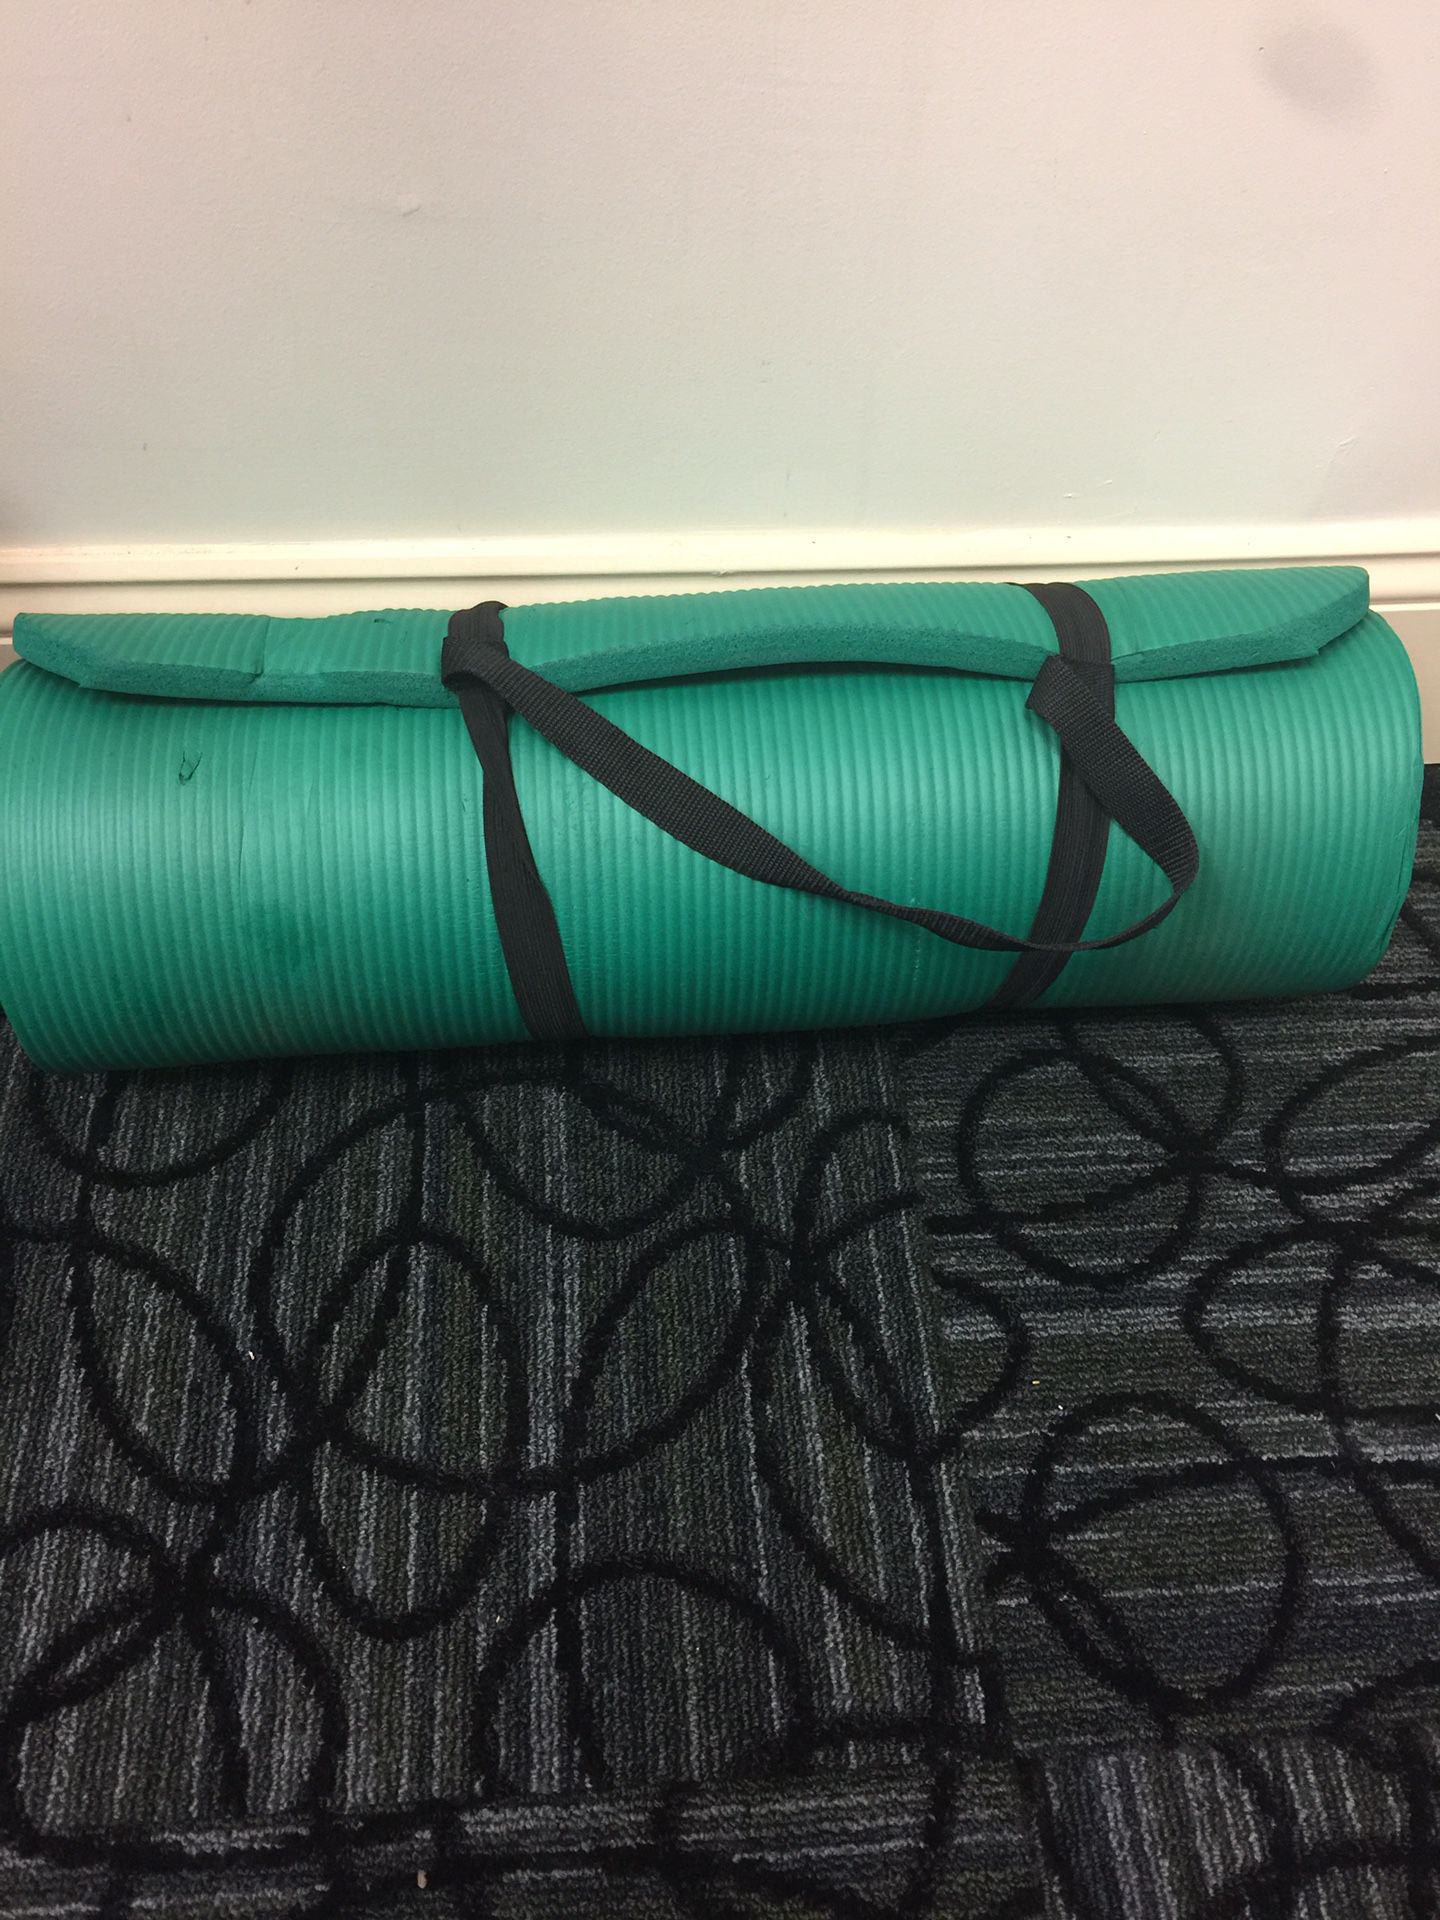 Extra thick exercise mat